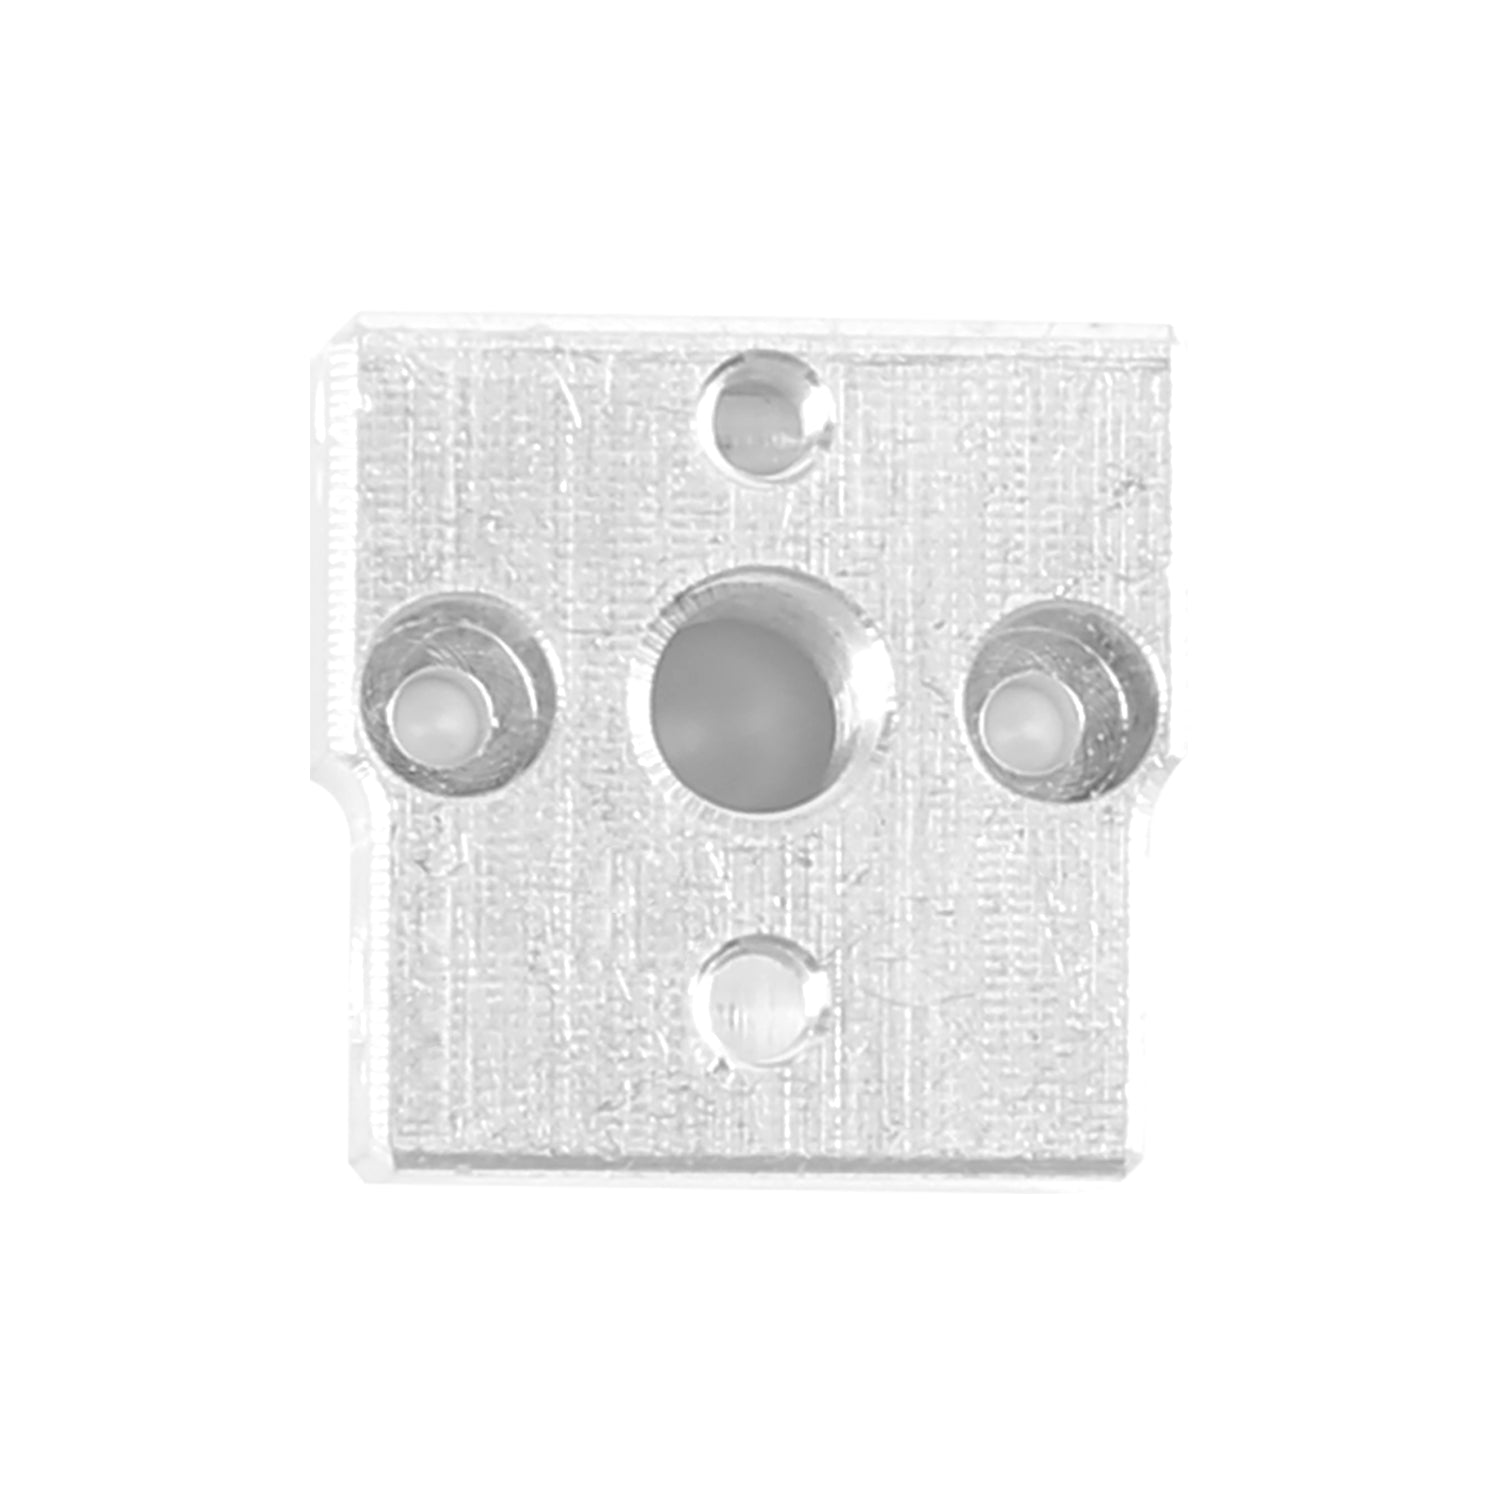 Creality Heating Block  - CR-10 Smart / CR-6 SE (Now in Stock!)